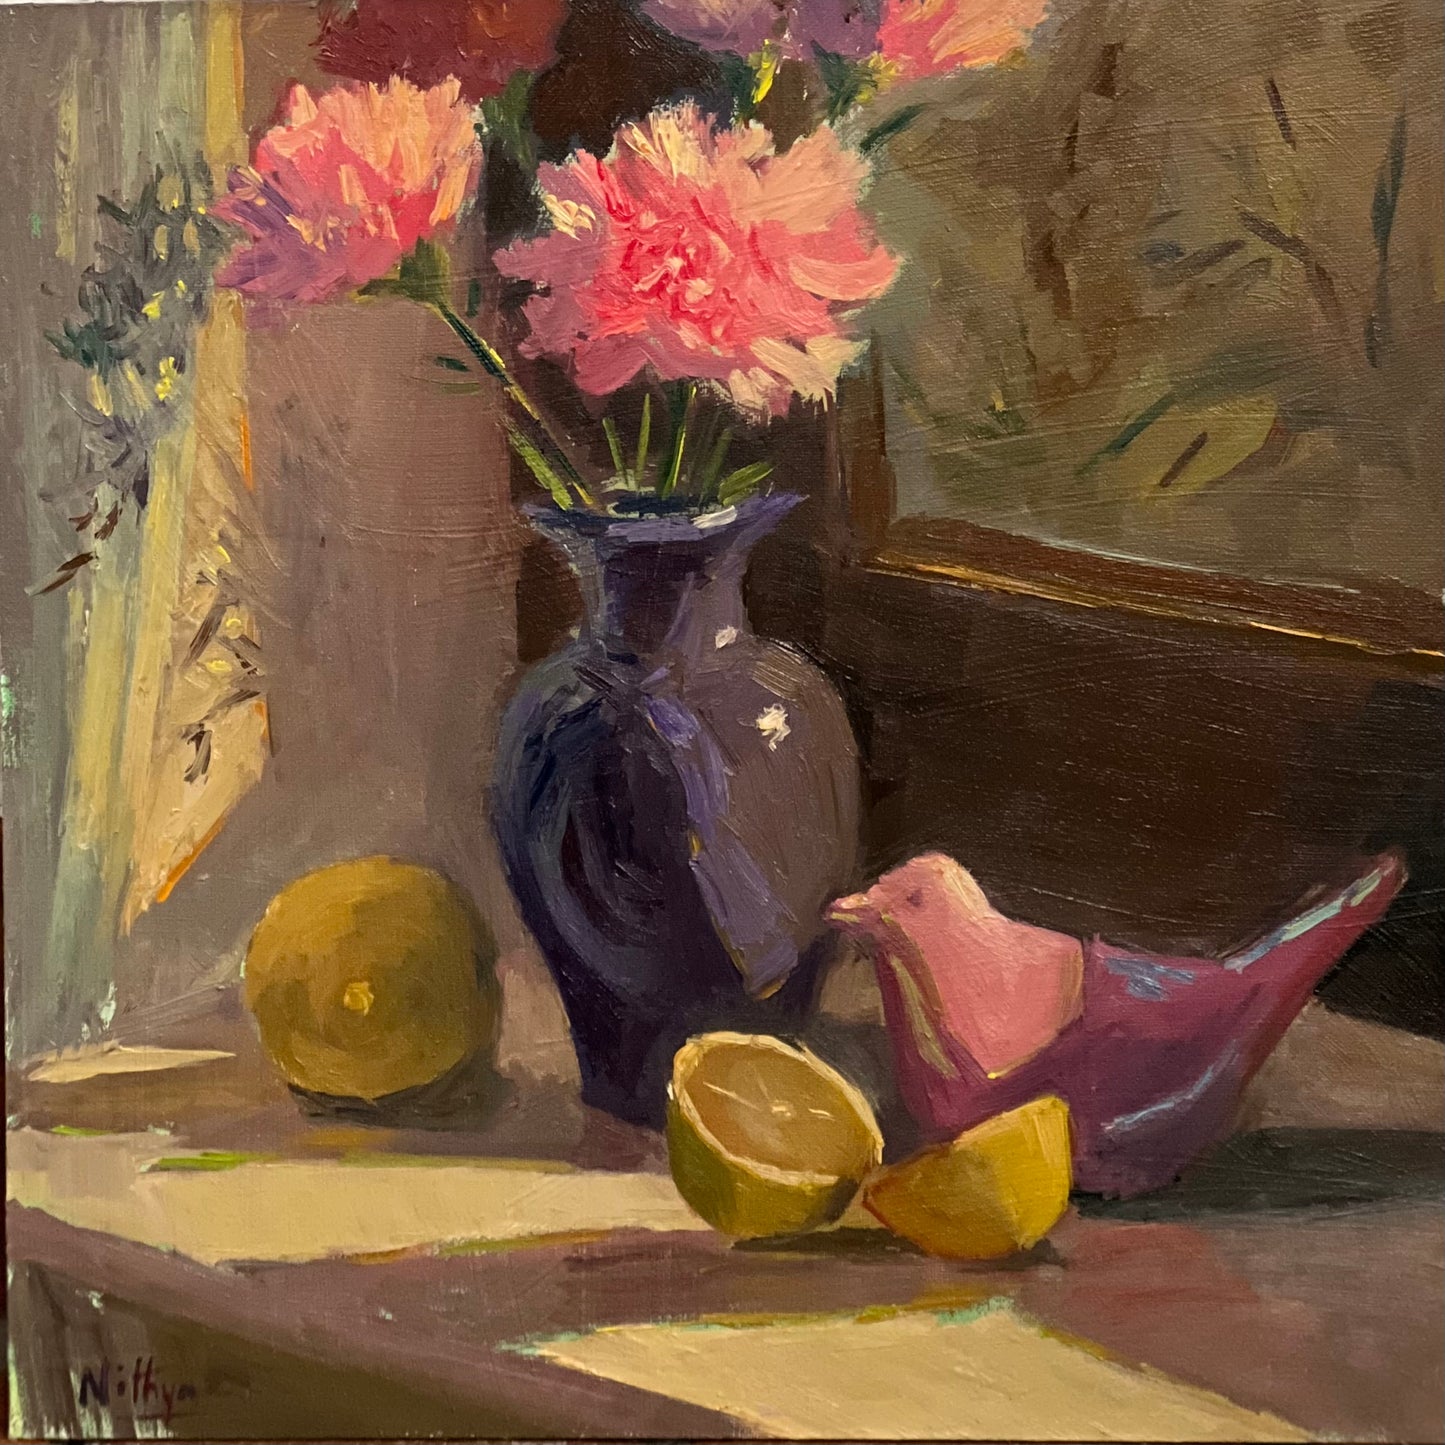 Purple and Pink in the sunlight - still life oil painting